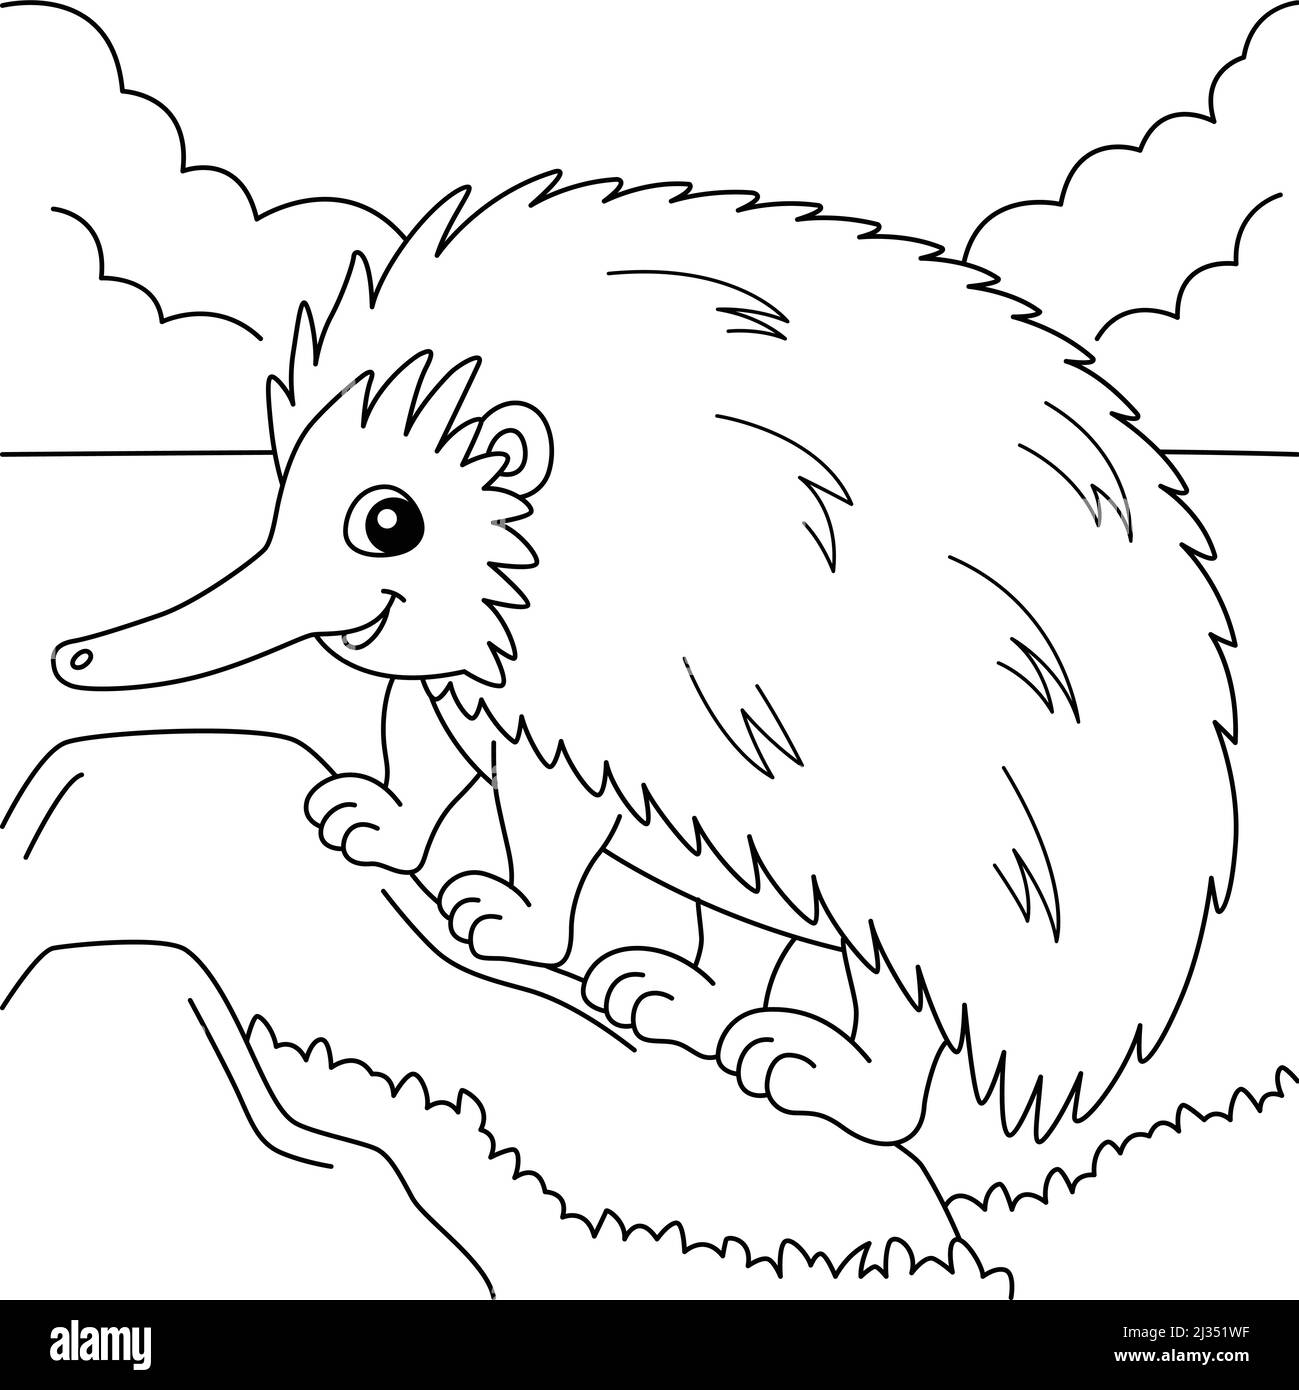 Echidna Animal Coloring Page for Kids Stock Vector Image & Art - Alamy